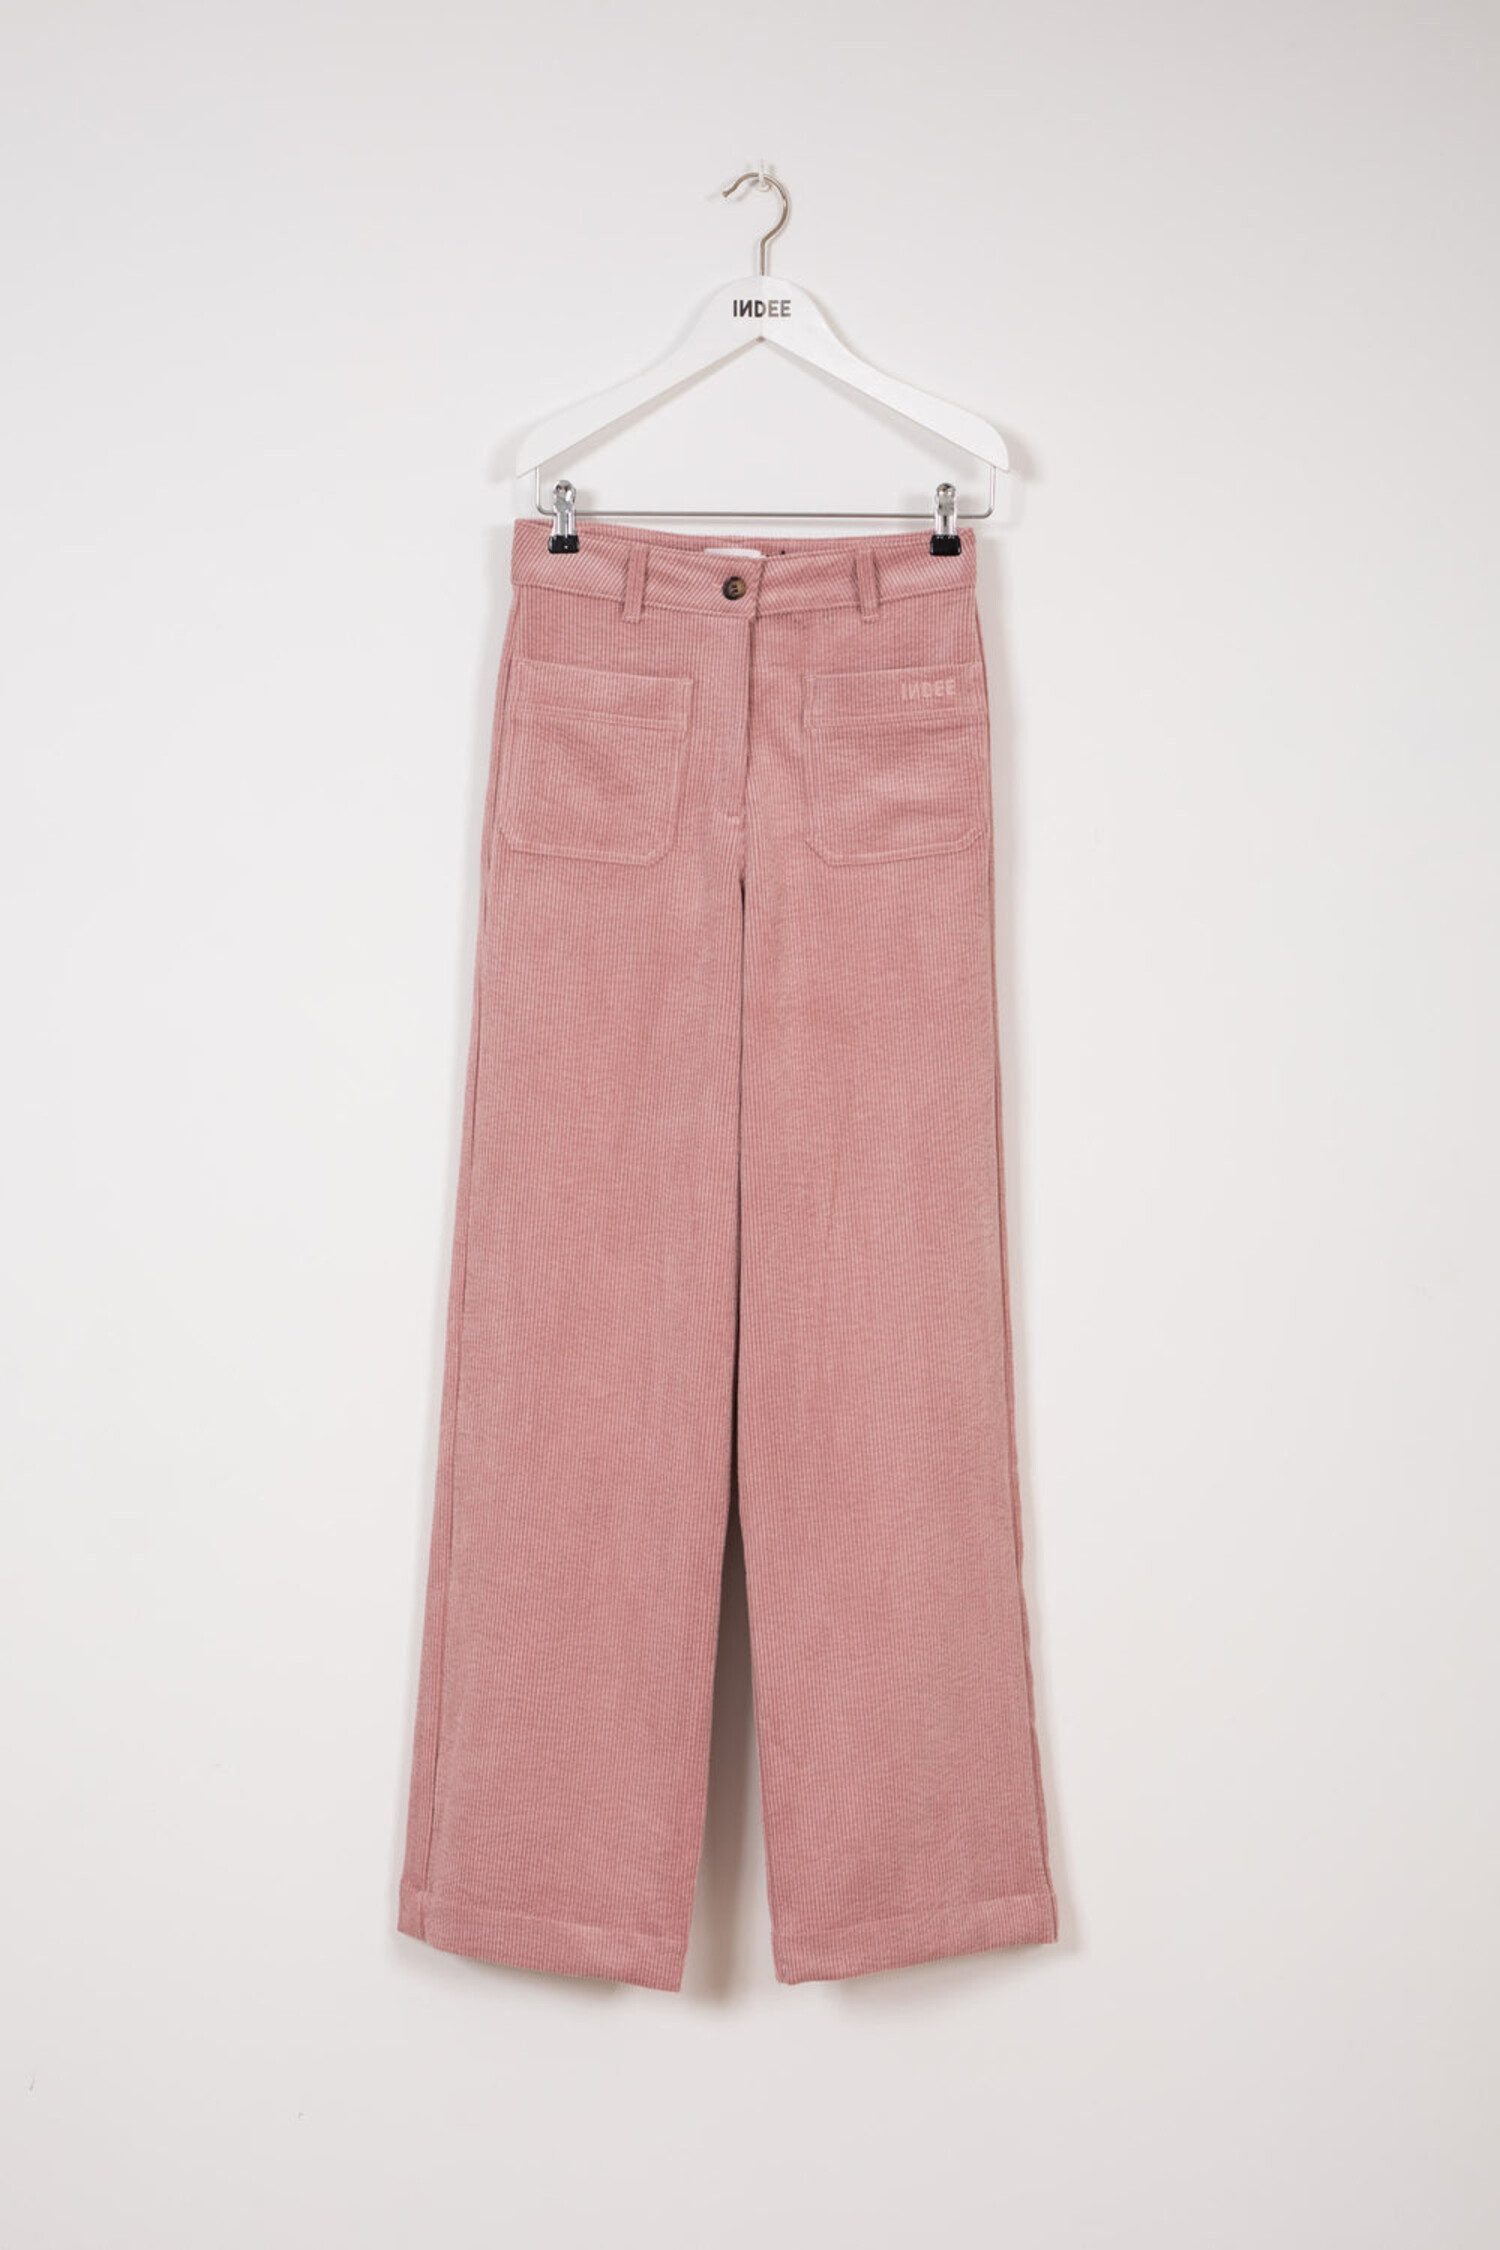 NWT A New Day Cropped Corduroy Pants 12 Pink